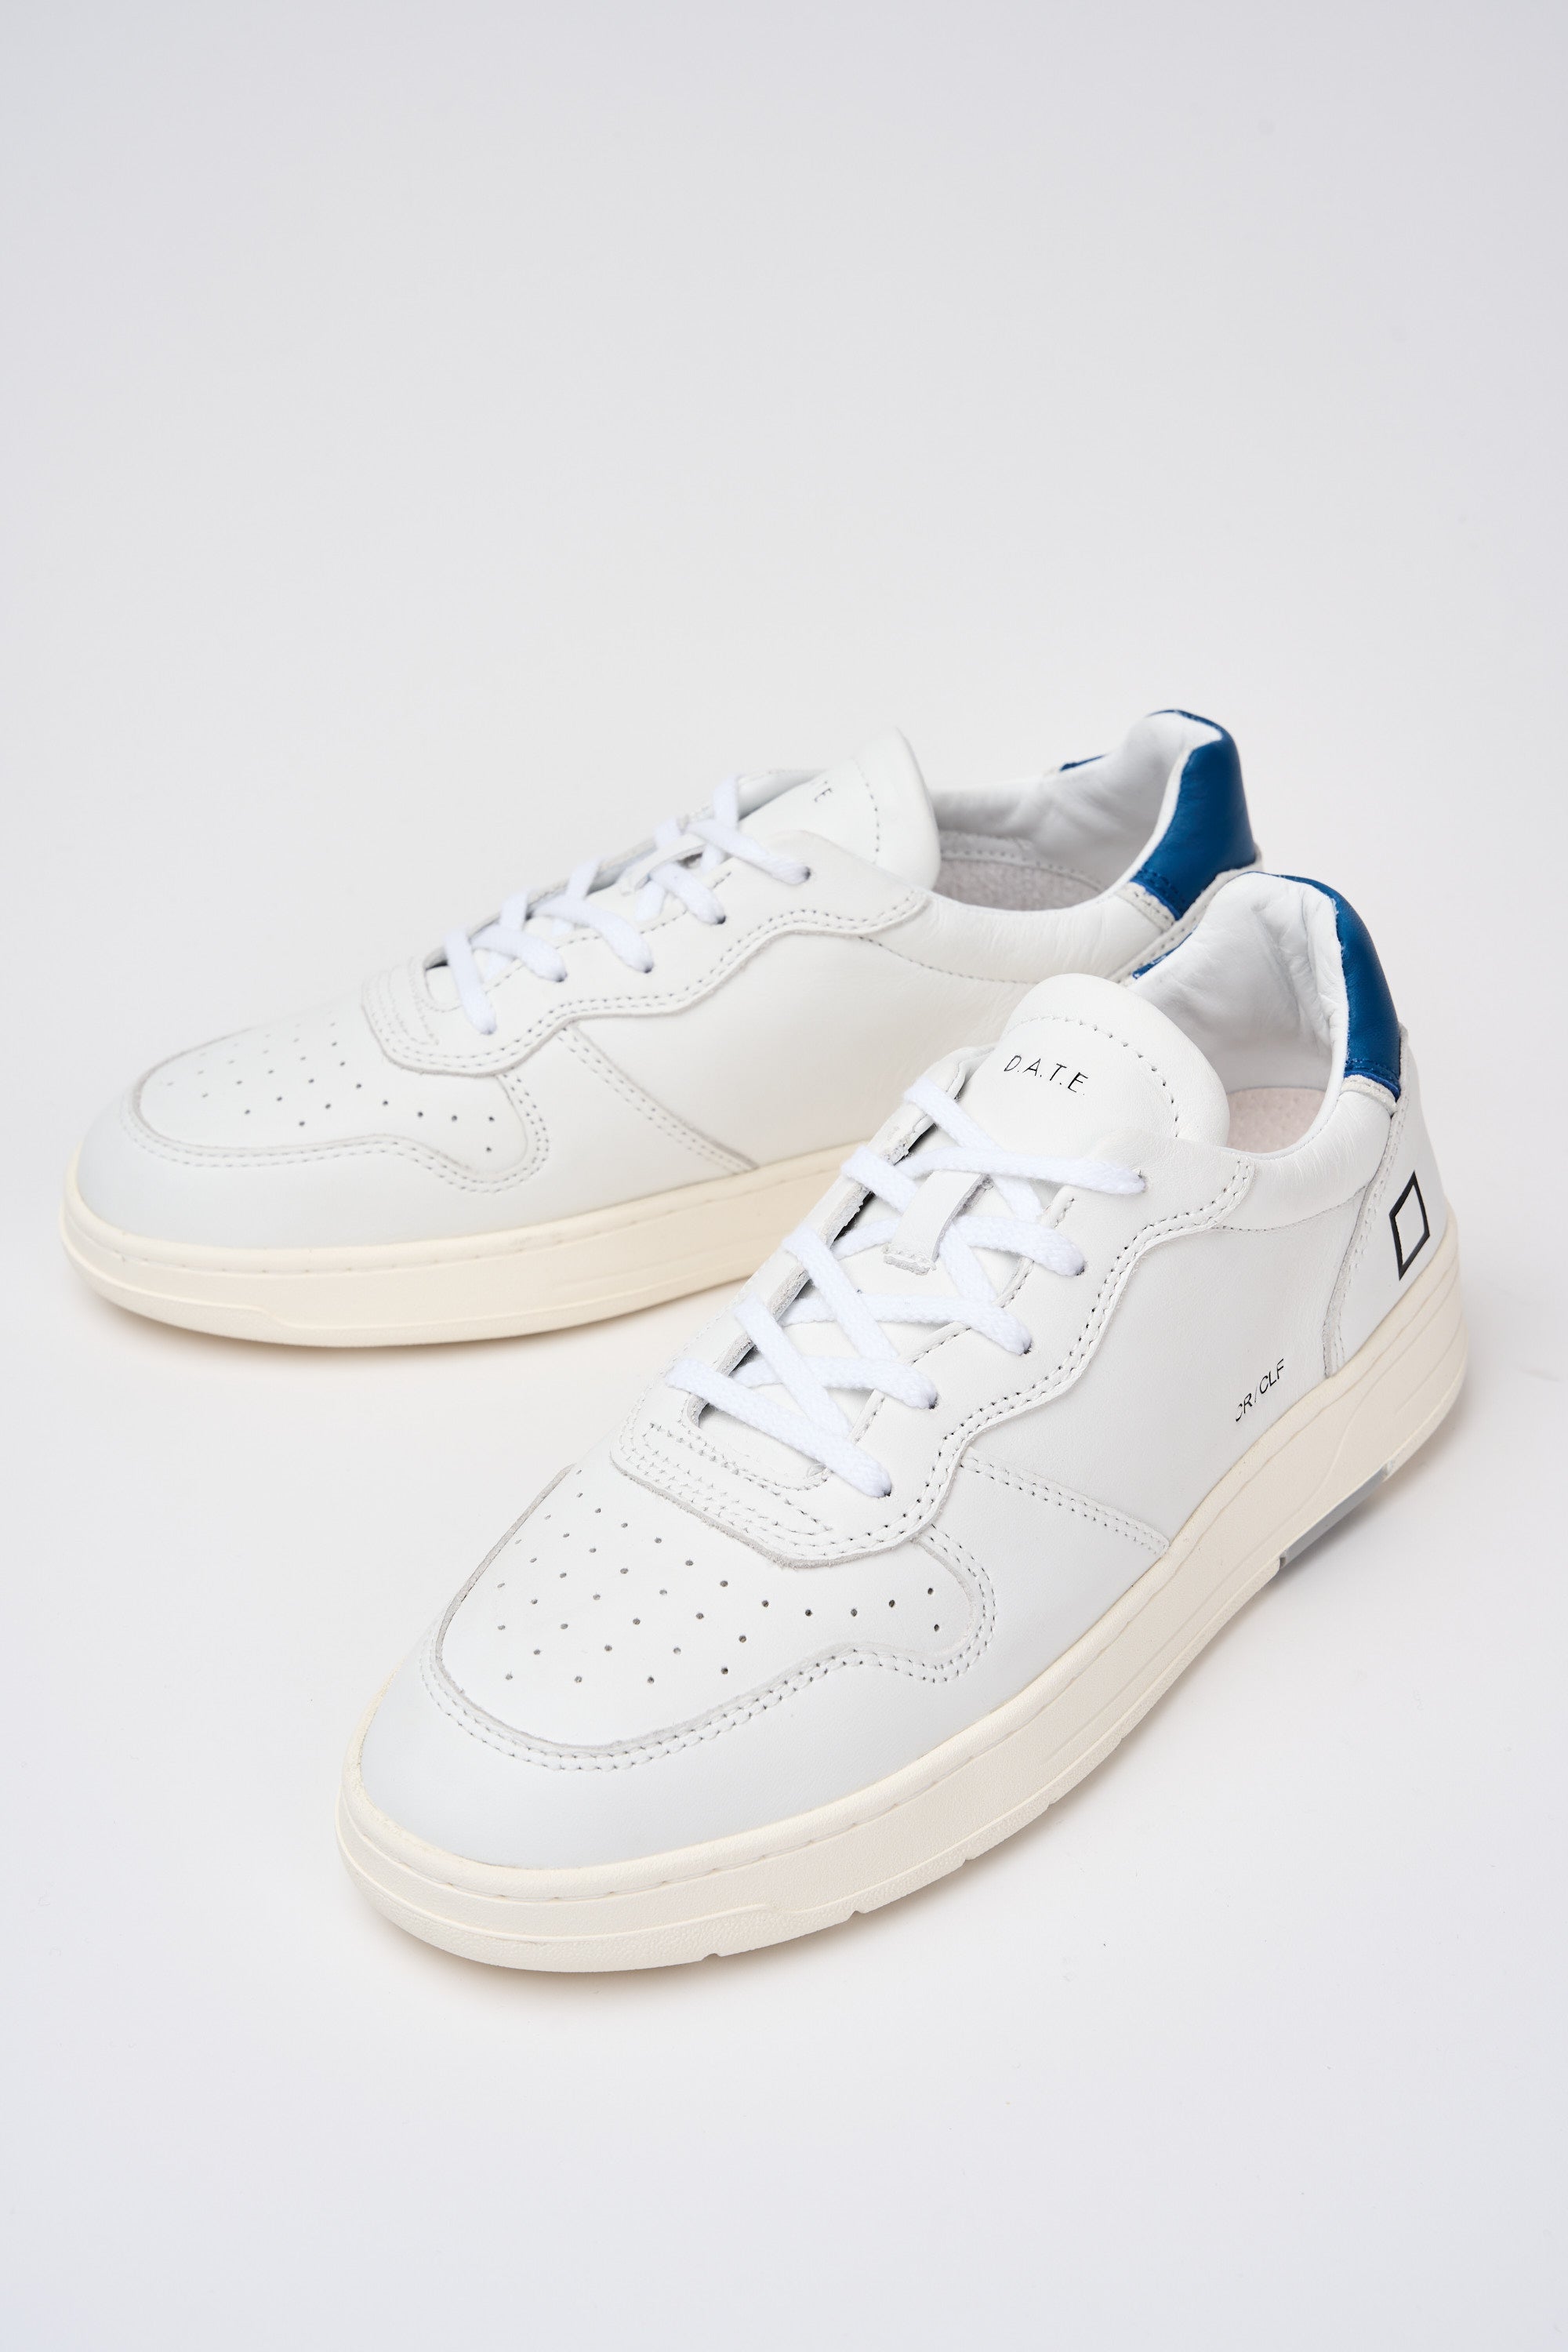 D.A.T.E. Leather Court Sneaker in White/Blue-6